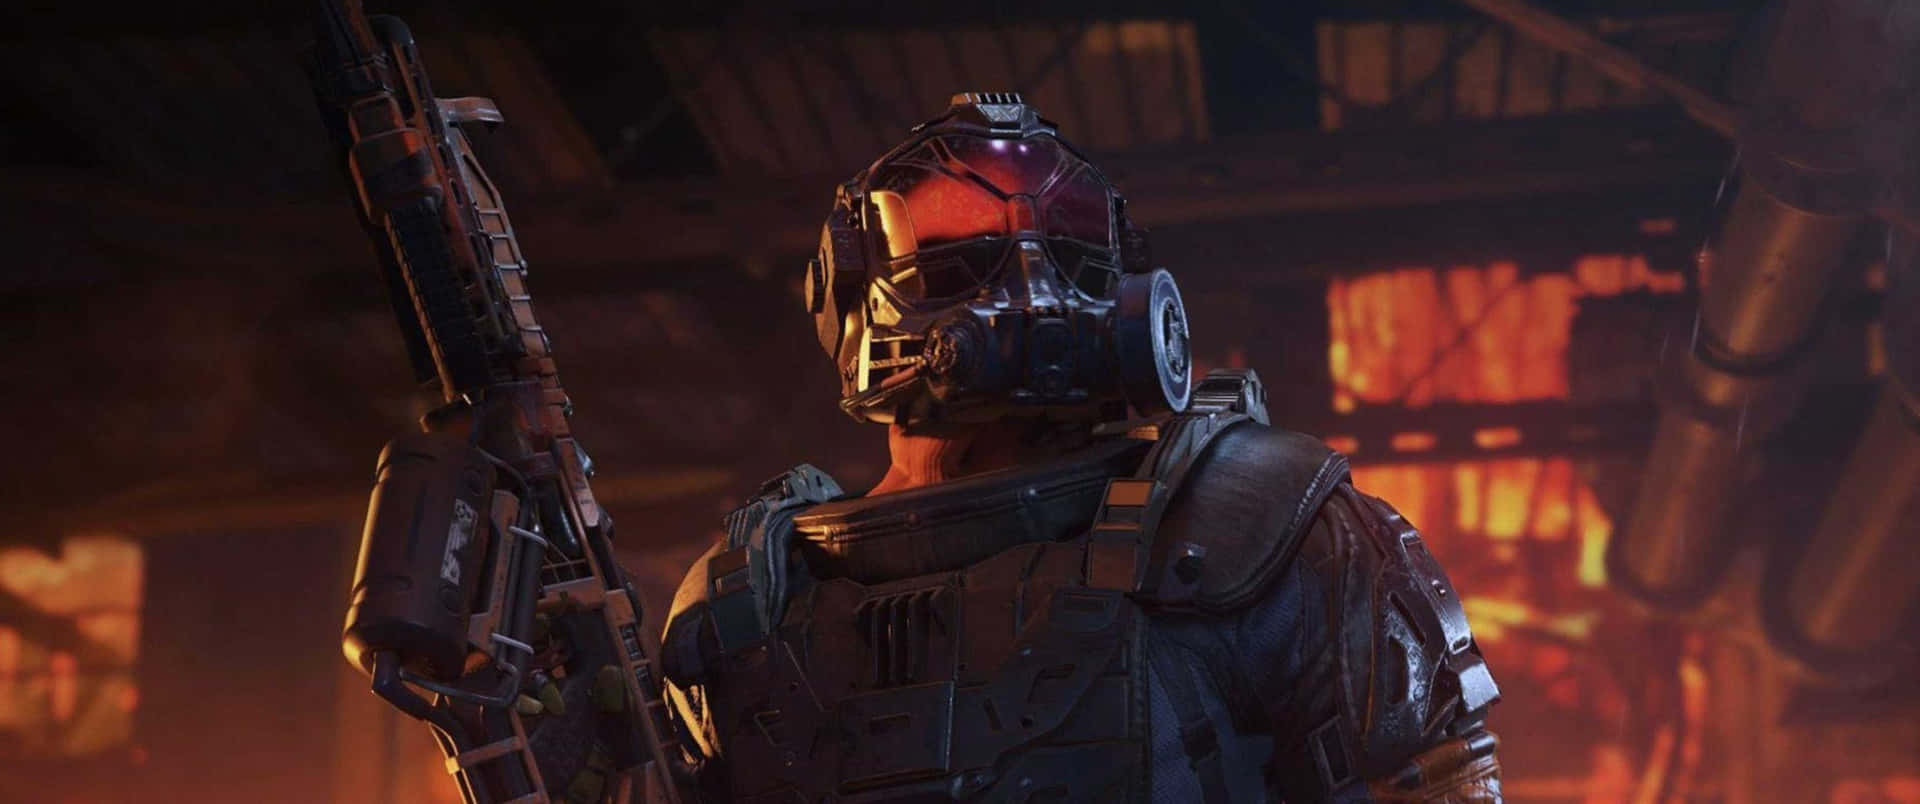 Fight through the challenges of Call Of Duty Black Ops 4 in 3440x1440p resolution